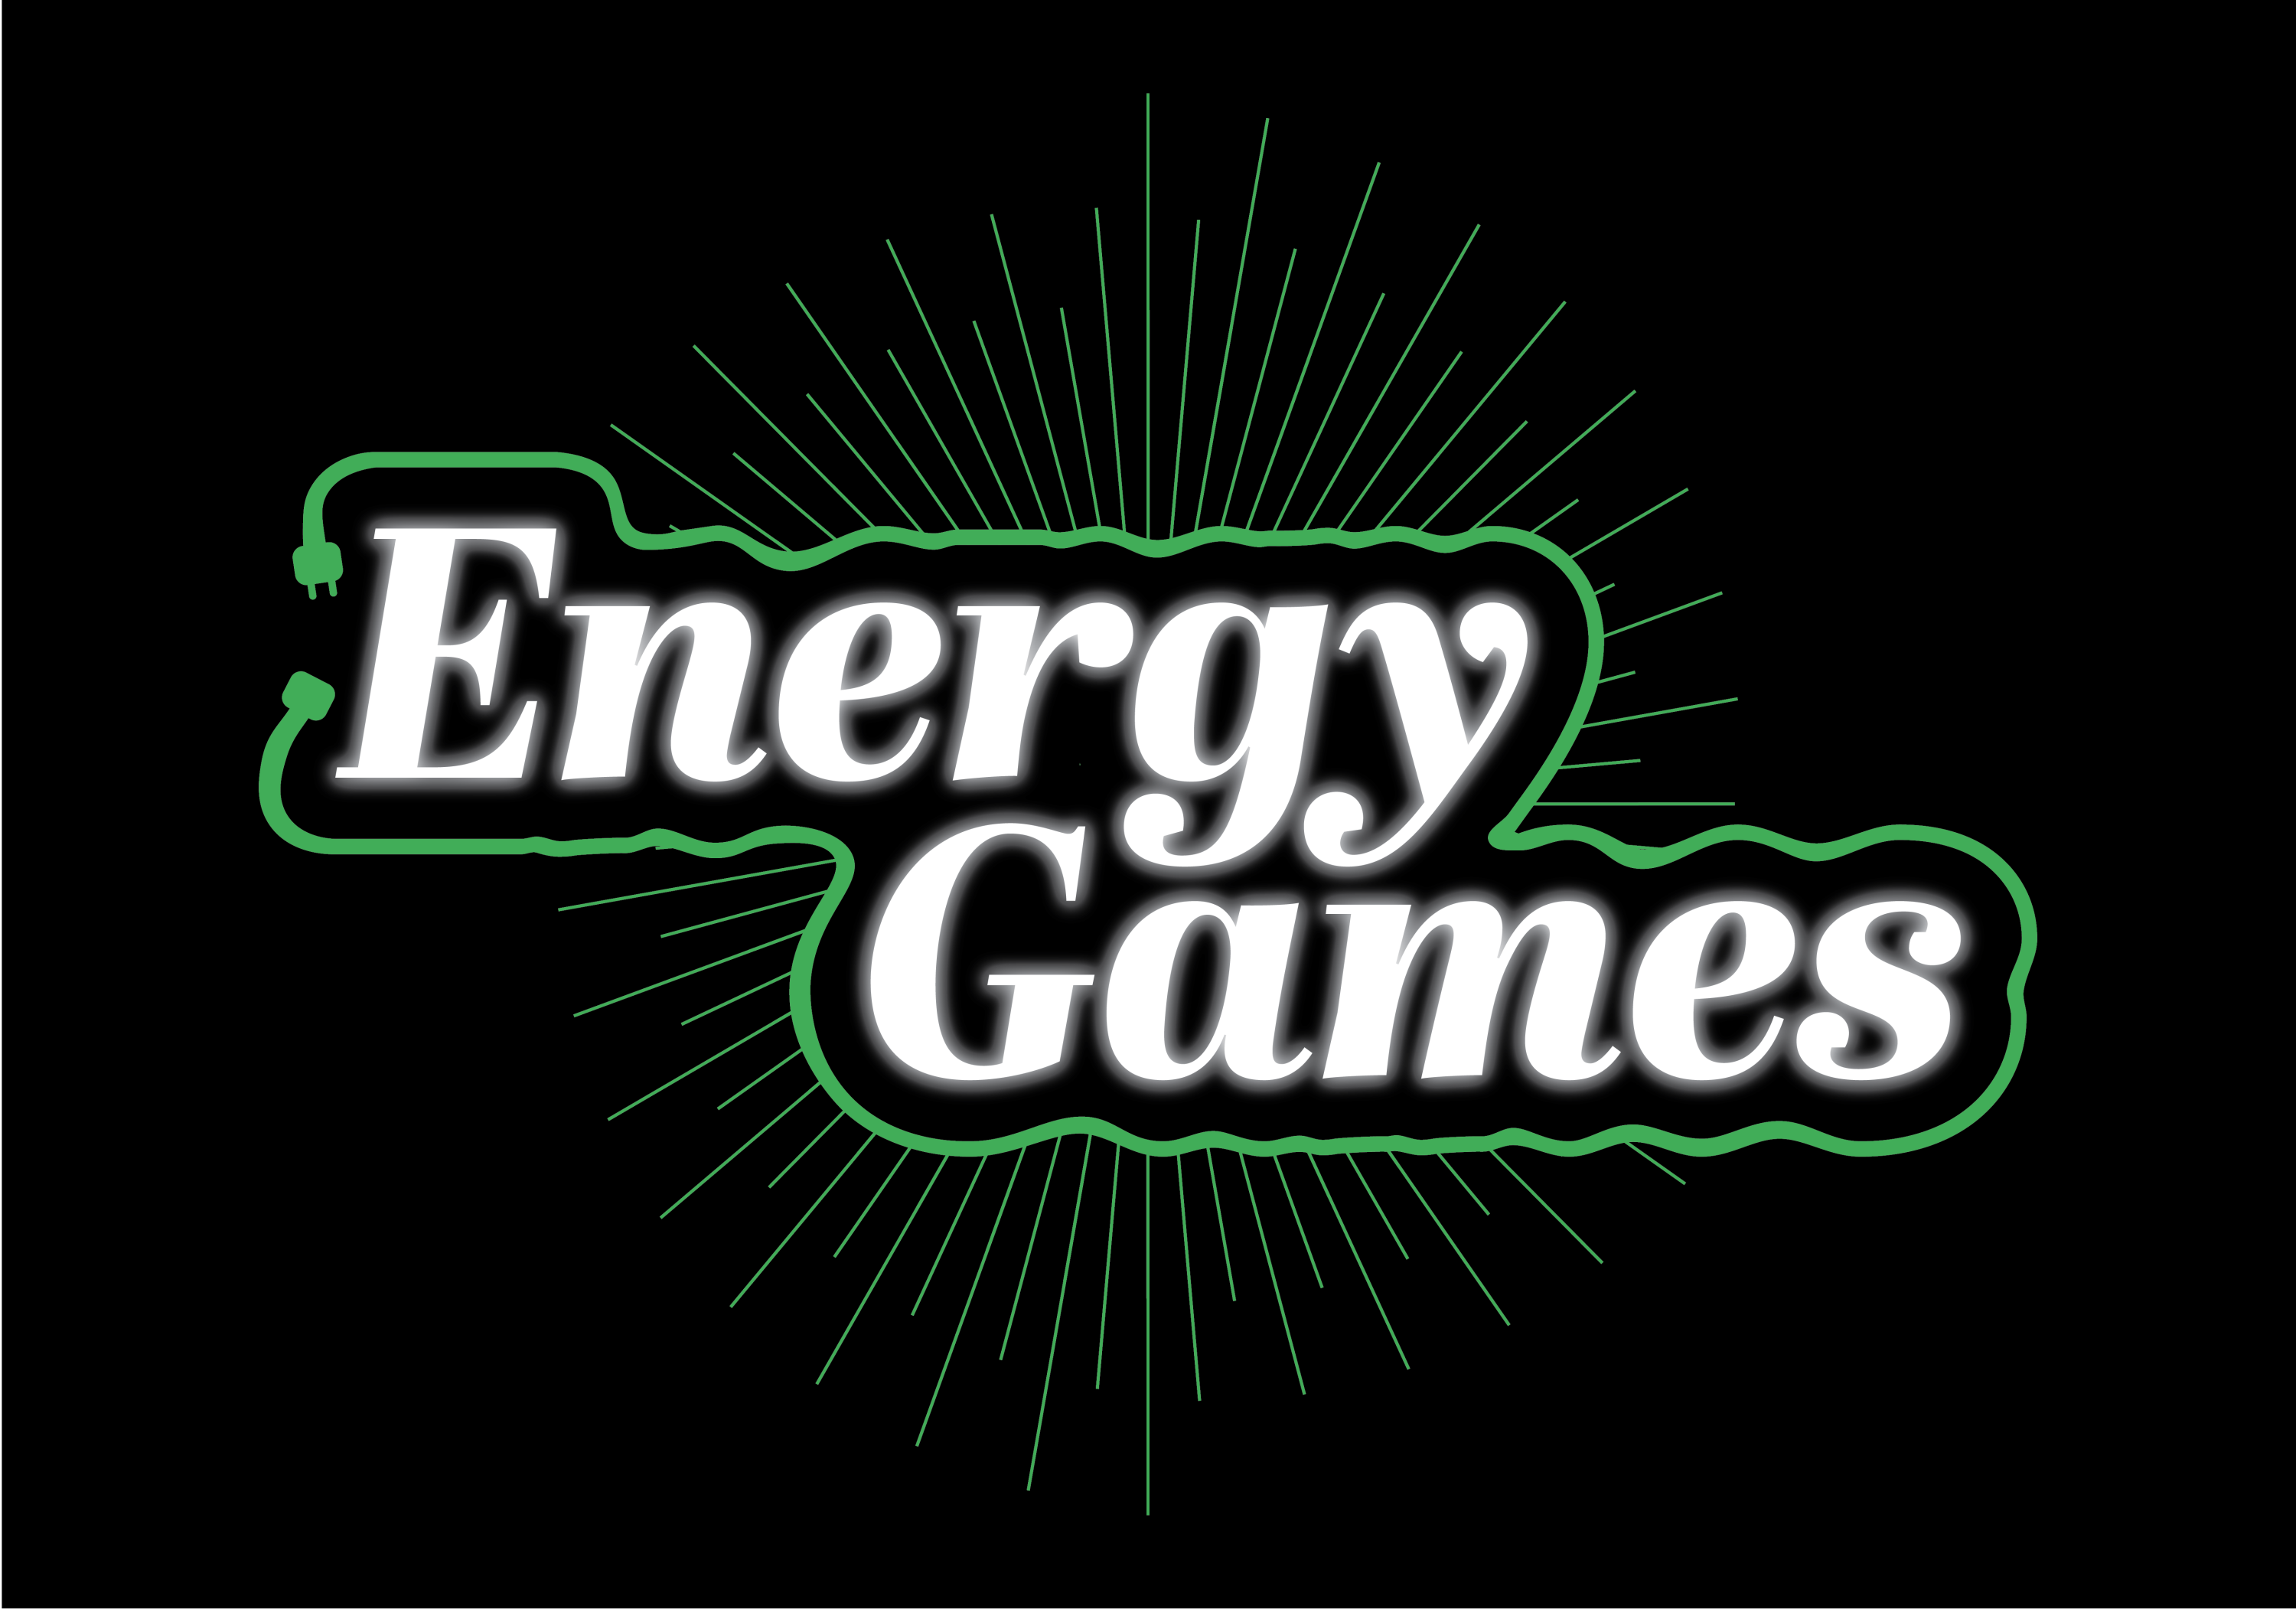 Energy games text surrounded by electric plug with sunburst behind